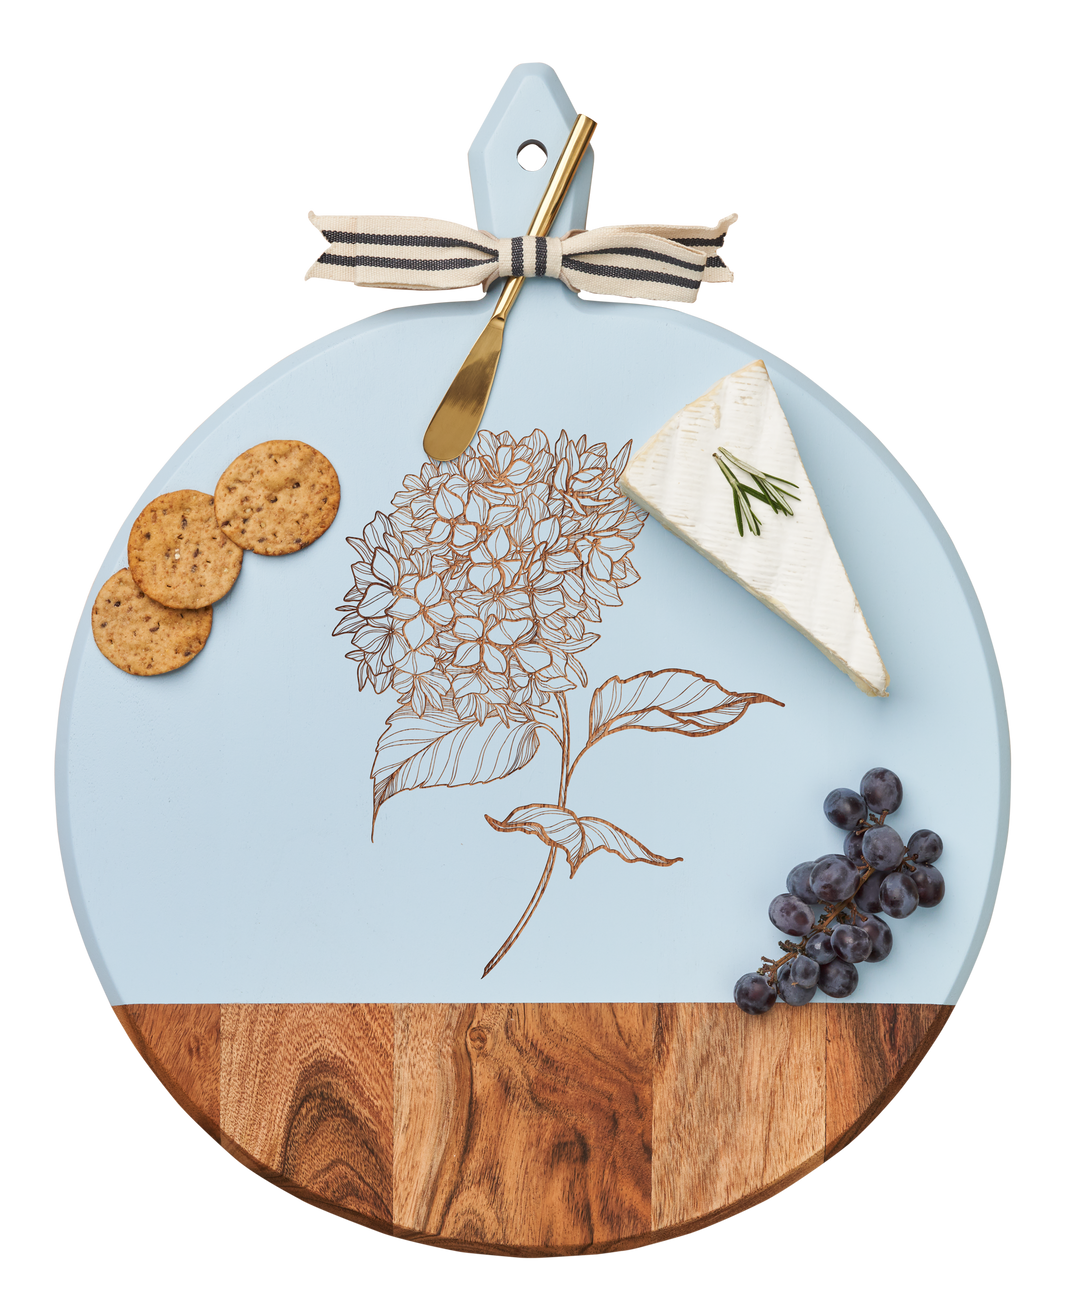 Acacia Heirloom Board with Handle Round & Gold Spreader Tied with Gray & White Ribbon | Hydrangea | 20 x 16"